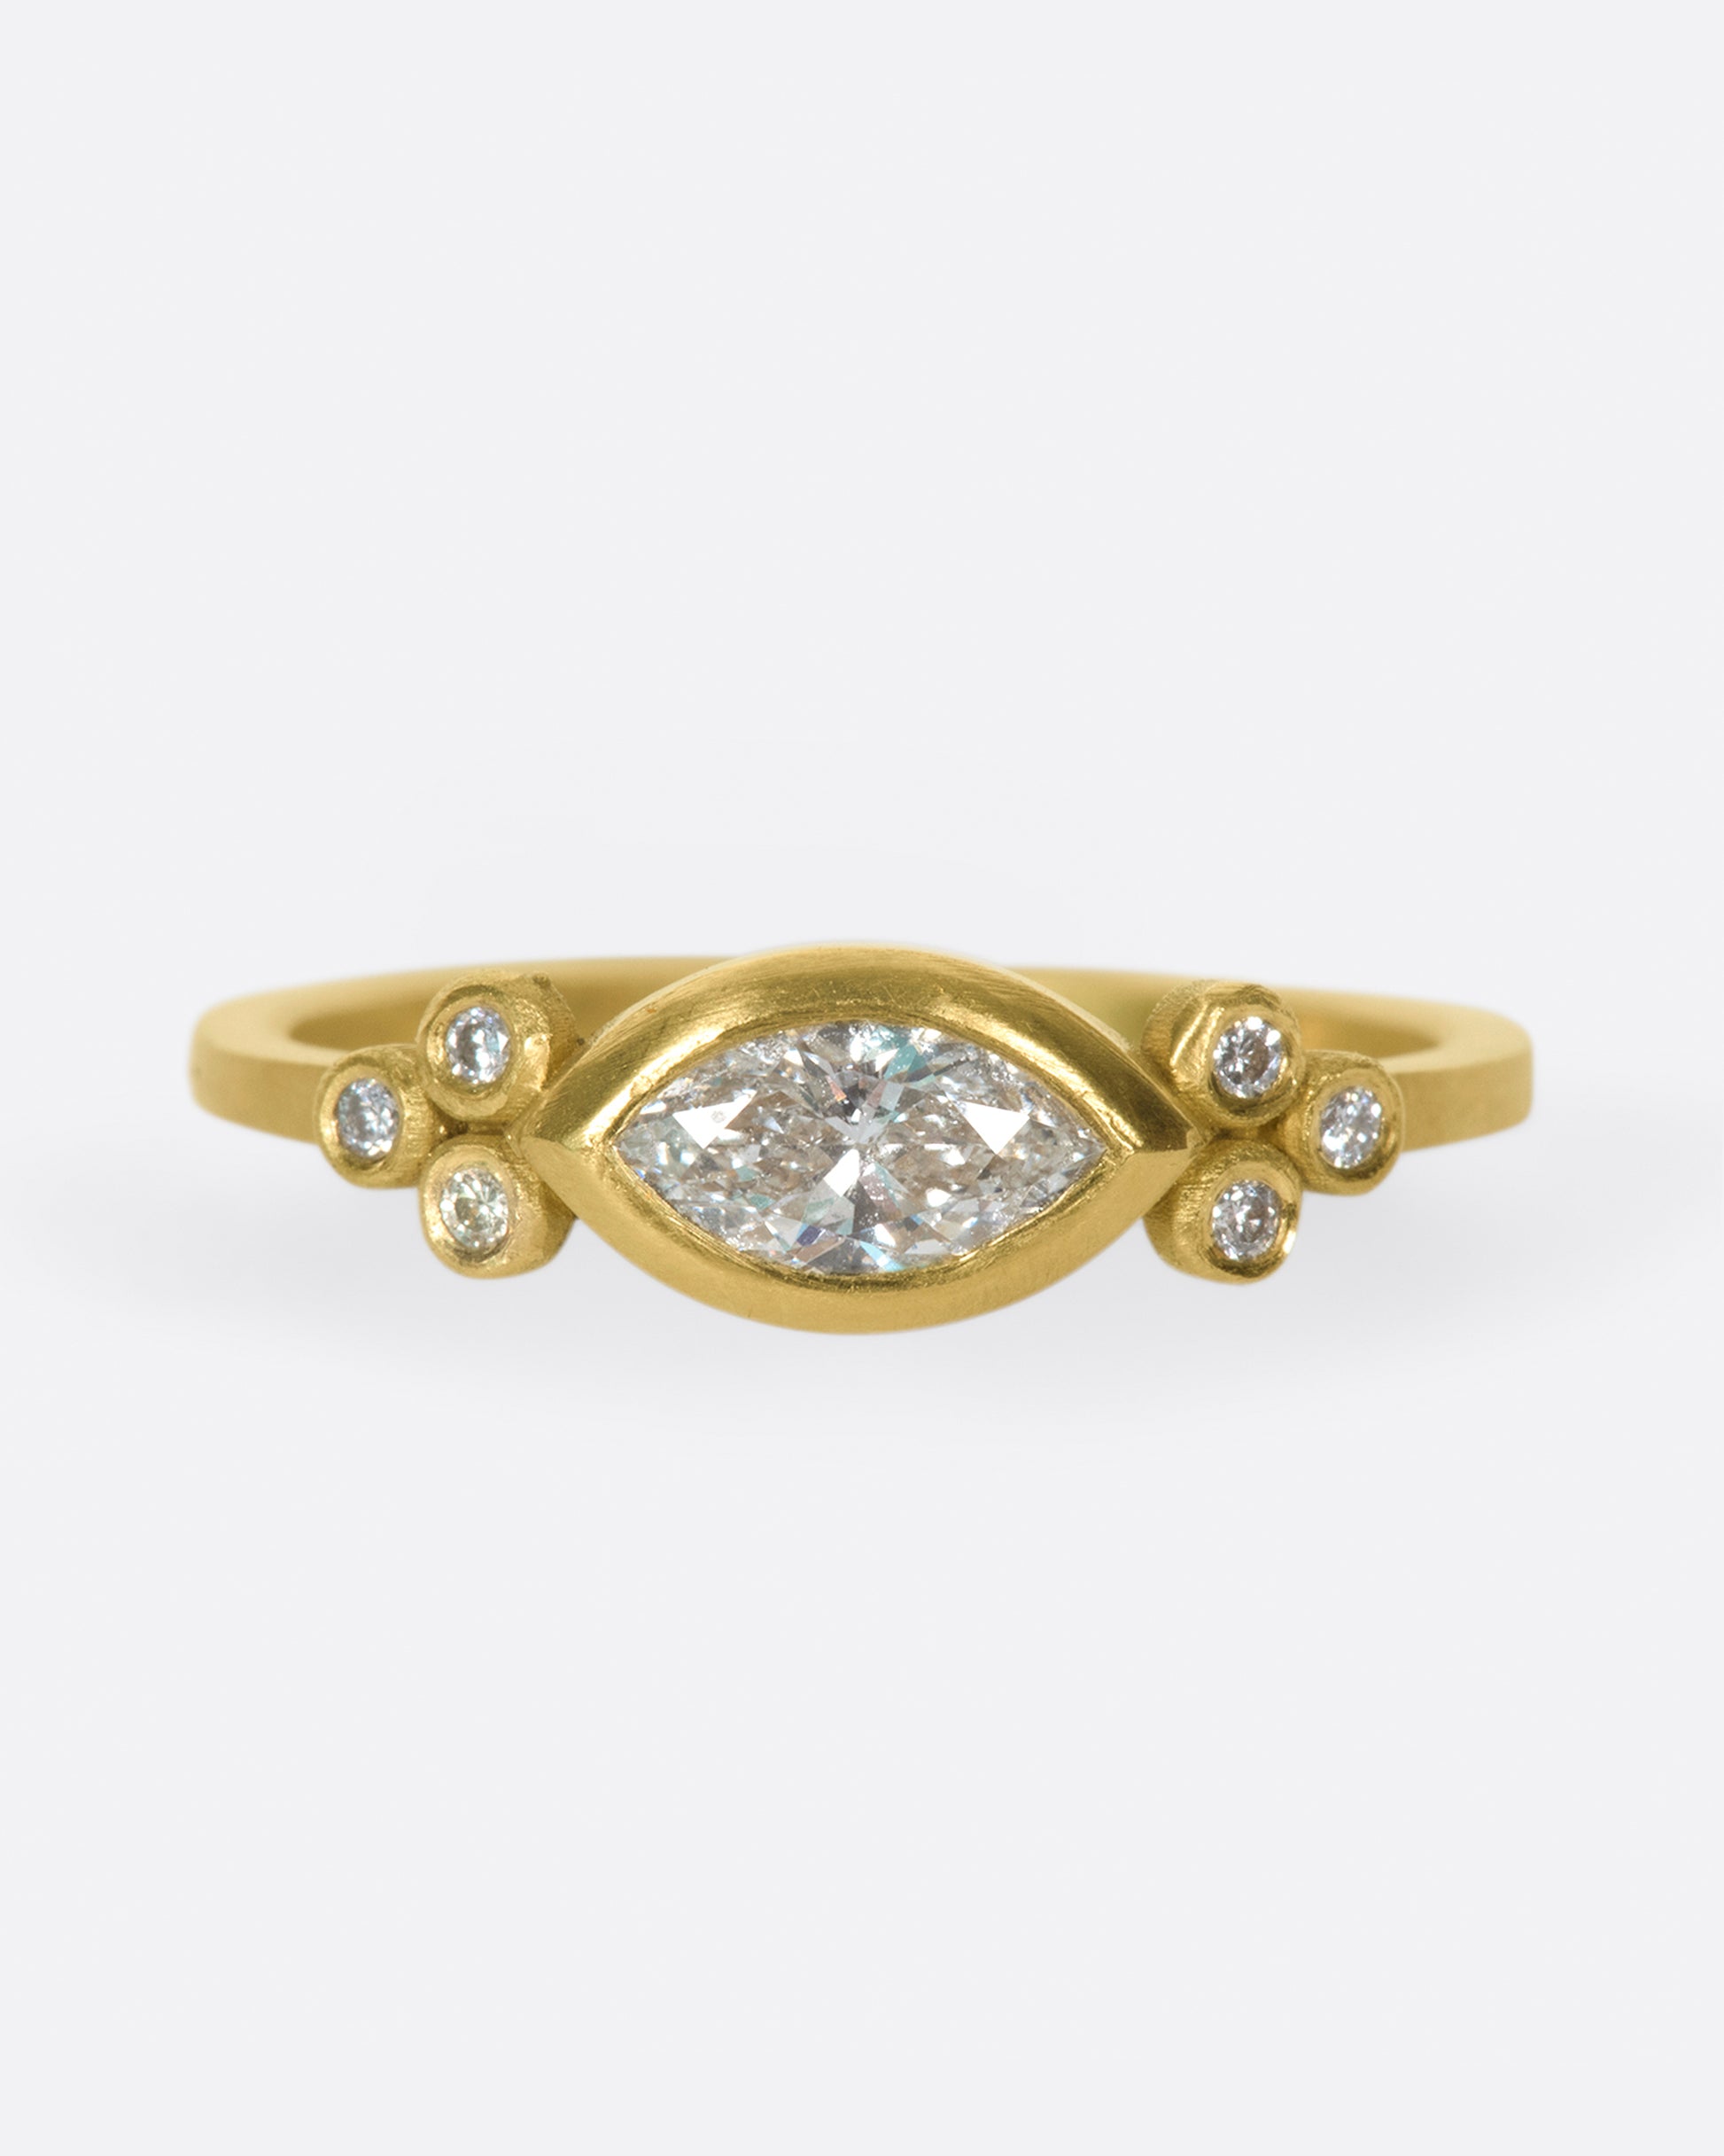 This ring features a sparkling, marquise diamond accented on each side by trios of tiny bezel set diamonds.